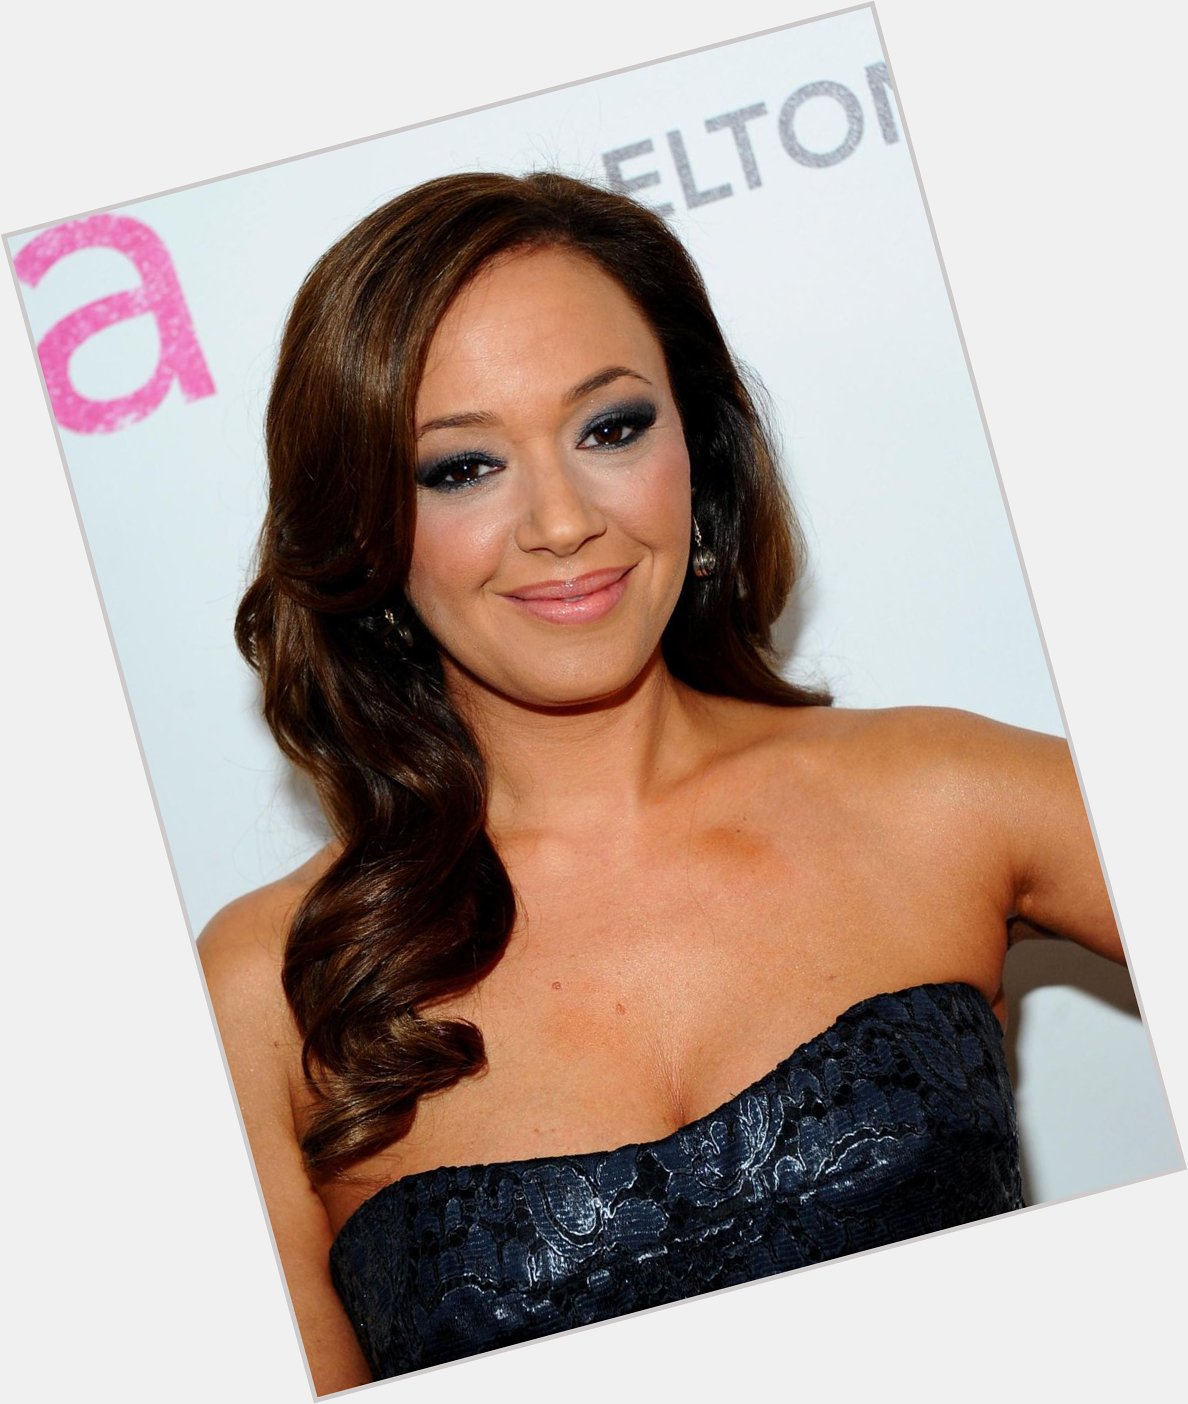 Happy Birthday to Leah Remini, who turns 45 today! 